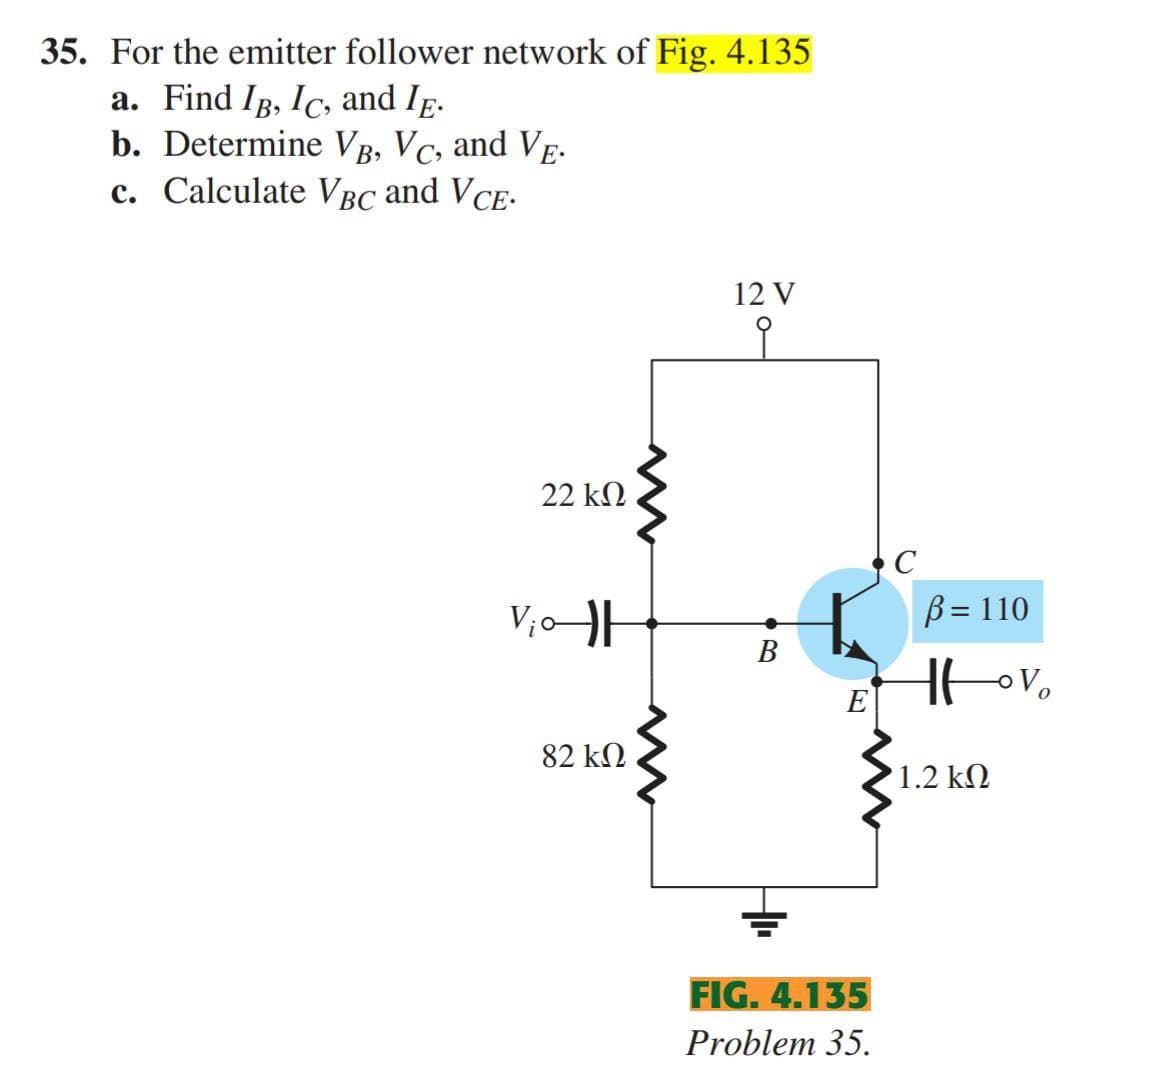 35. For the emitter follower network of Fig. 4.135
a. Find IB, Ic, and Ip.
b. Determine VB, Vc, and VE-
c. Calculate VBC and VCE-
12 V
22 k2
V;o
B = 110
В
E
82 kN
1.2 k2
FIG. 4.135
Problem 35.
